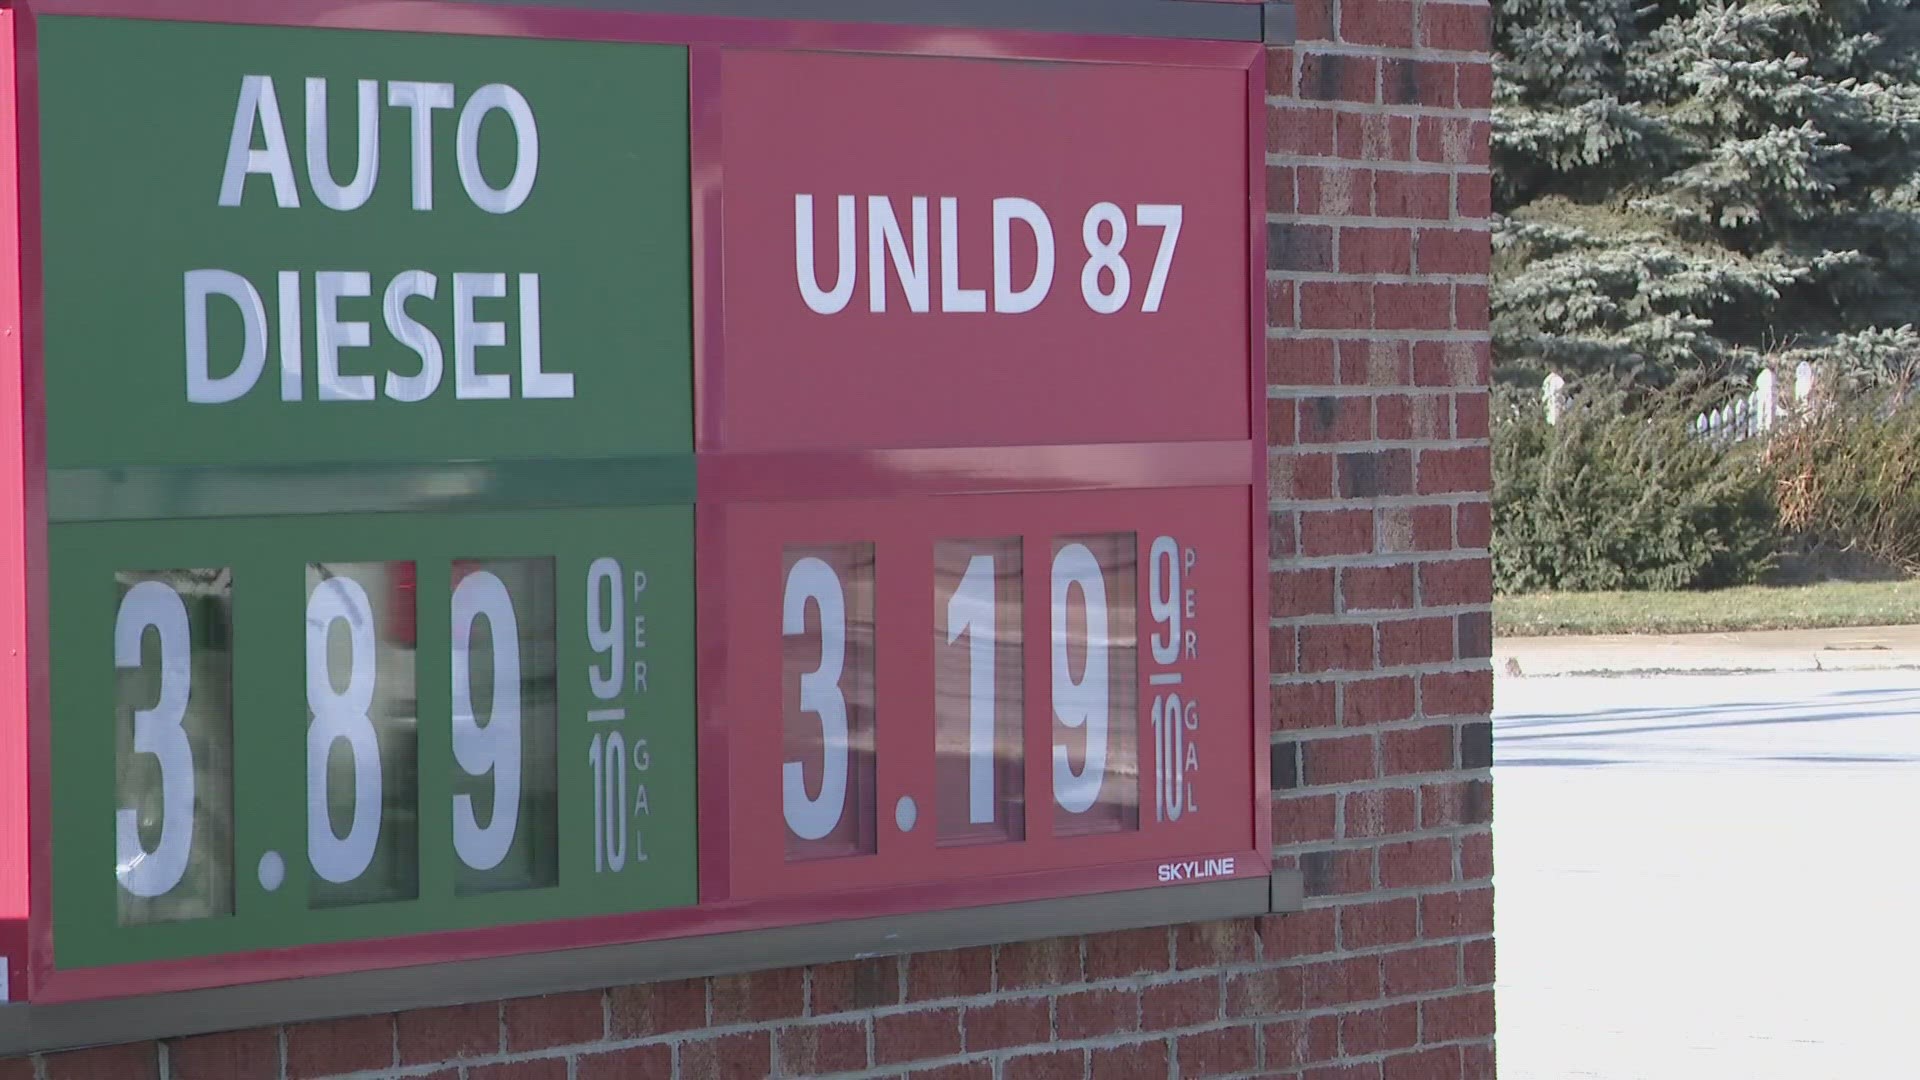 The average price in Akron is now listed at $3.28 per gallon, while Cleveland is slightly higher at $3.33.